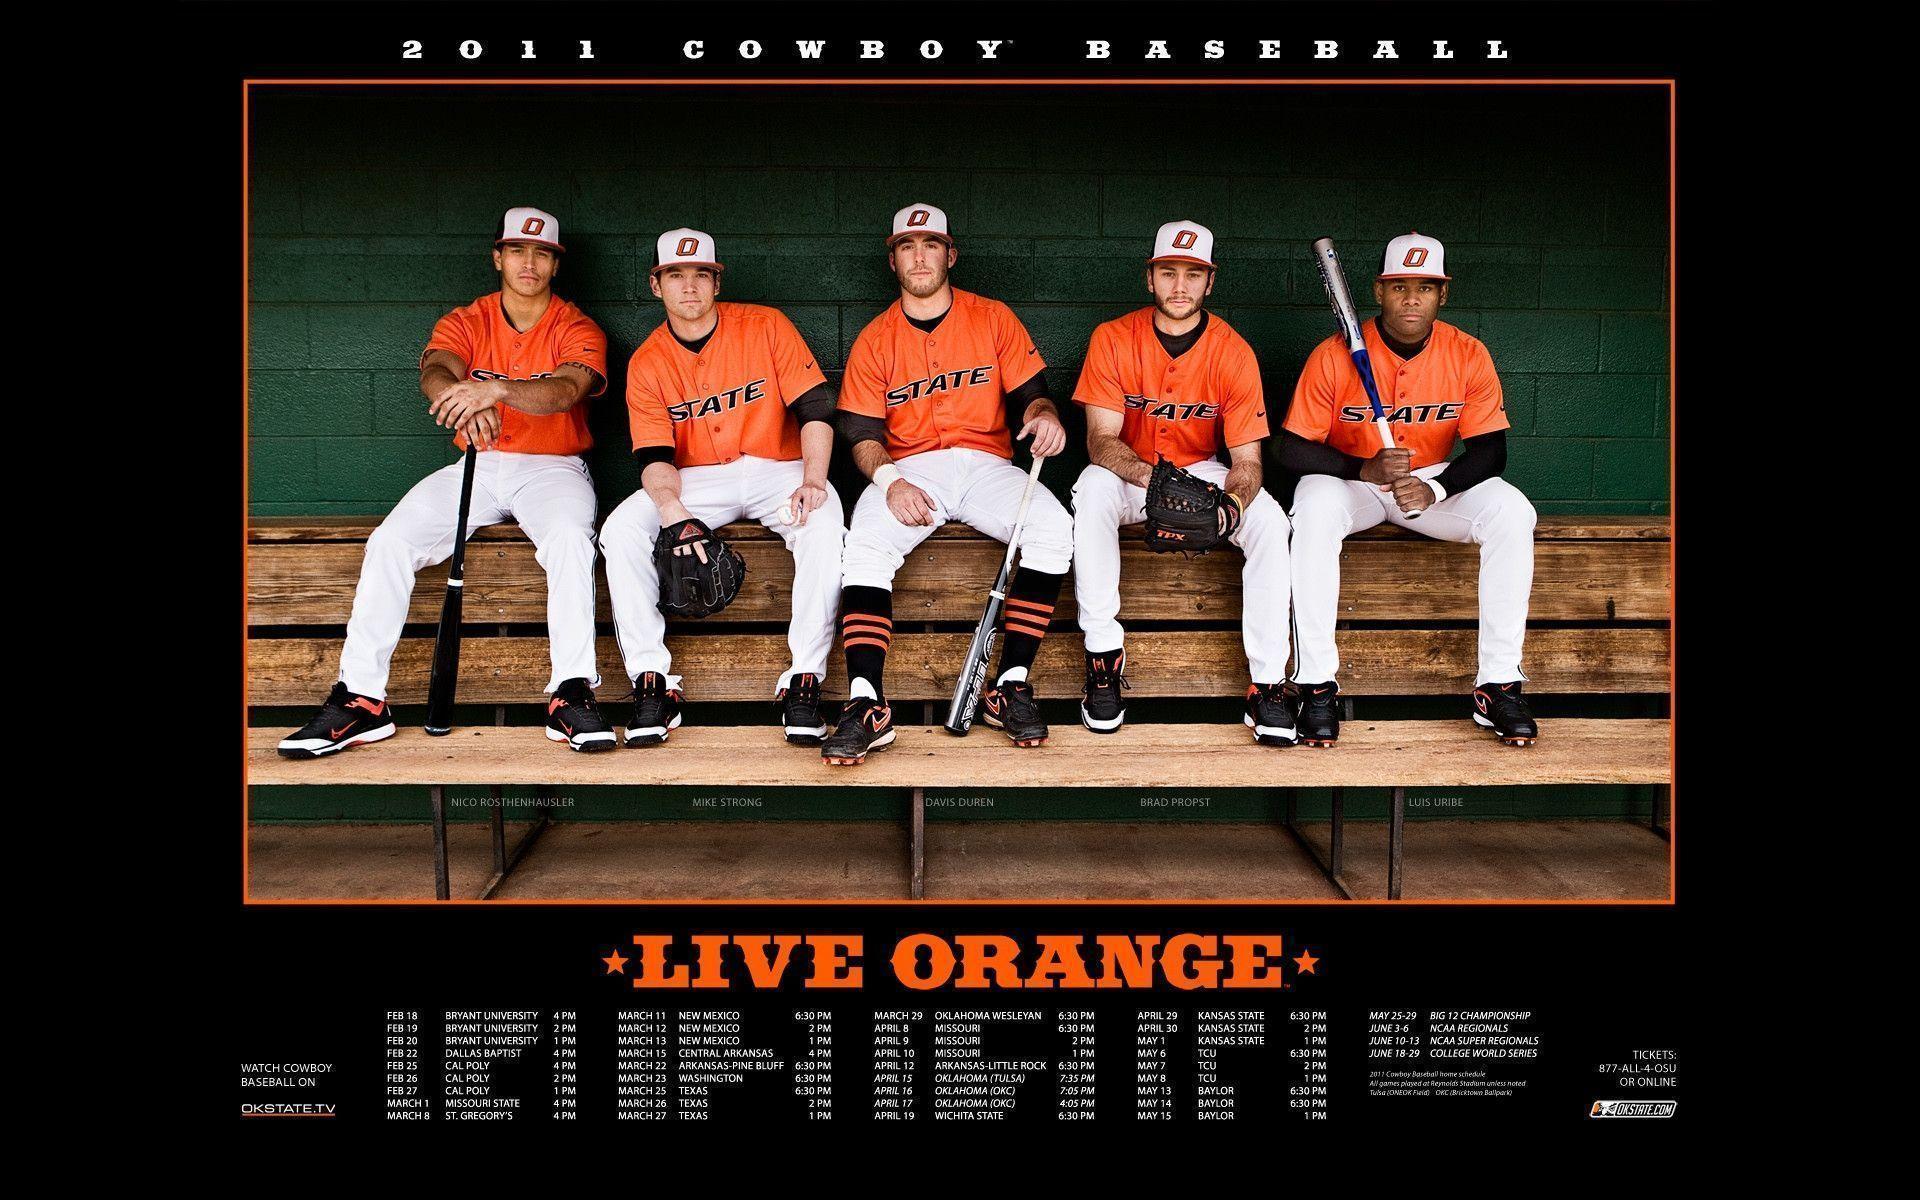 Oklahoma State baseball 2011 schedule, Desktop and mobile